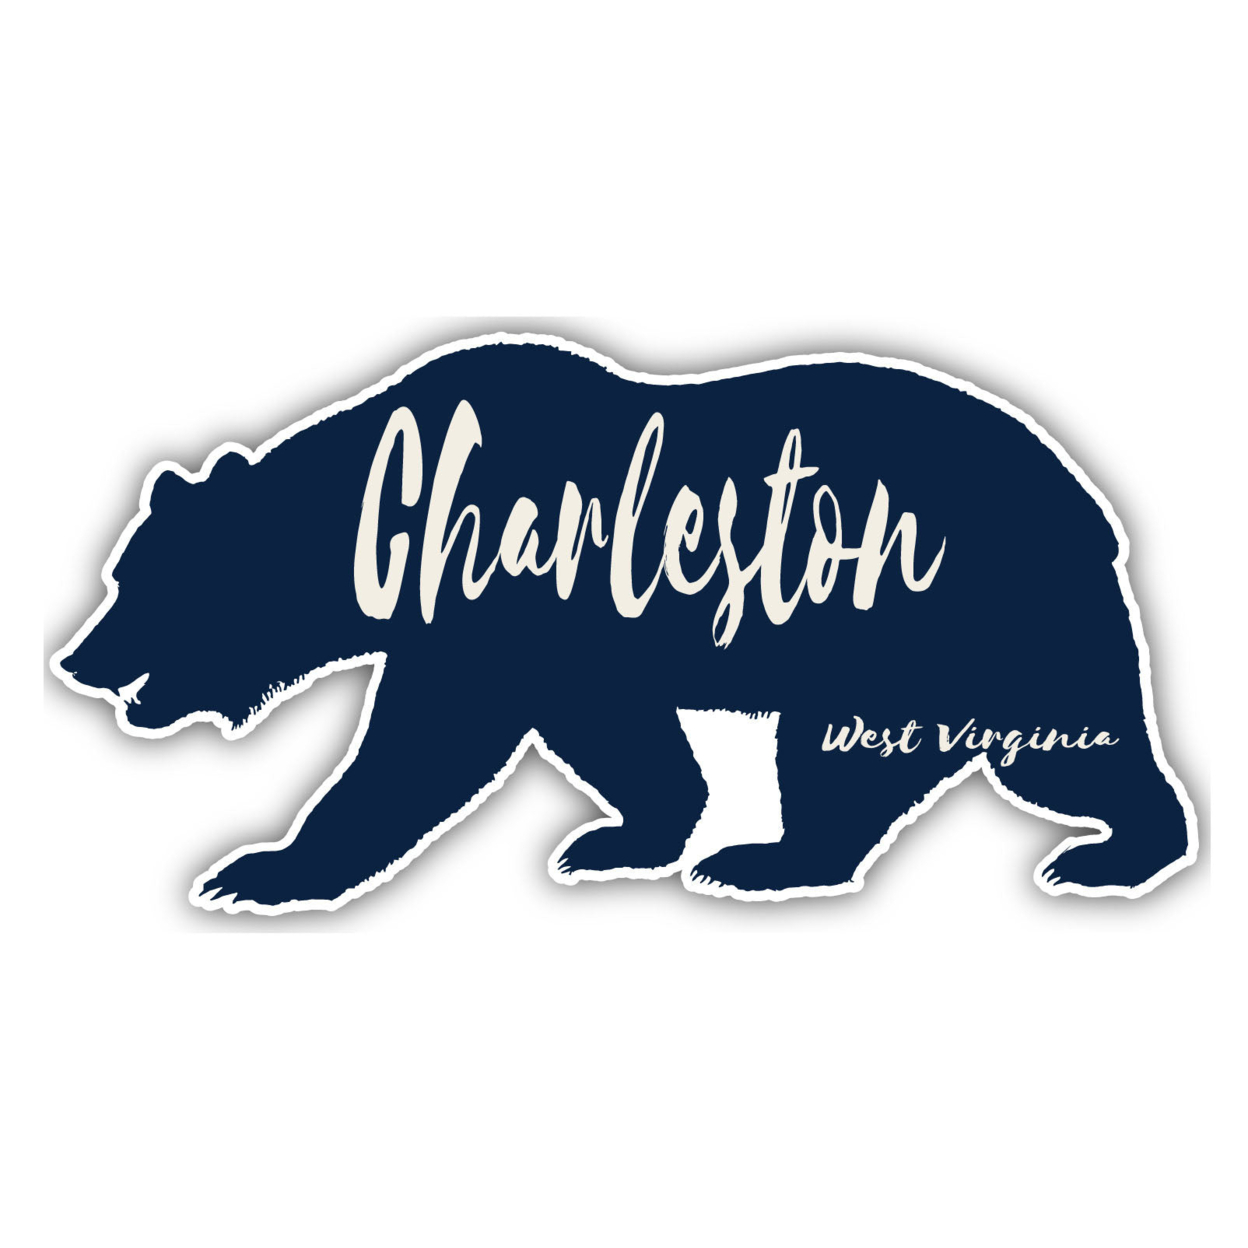 Charleston West Virginia Souvenir Decorative Stickers (Choose Theme And Size) - 4-Pack, 4-Inch, Bear